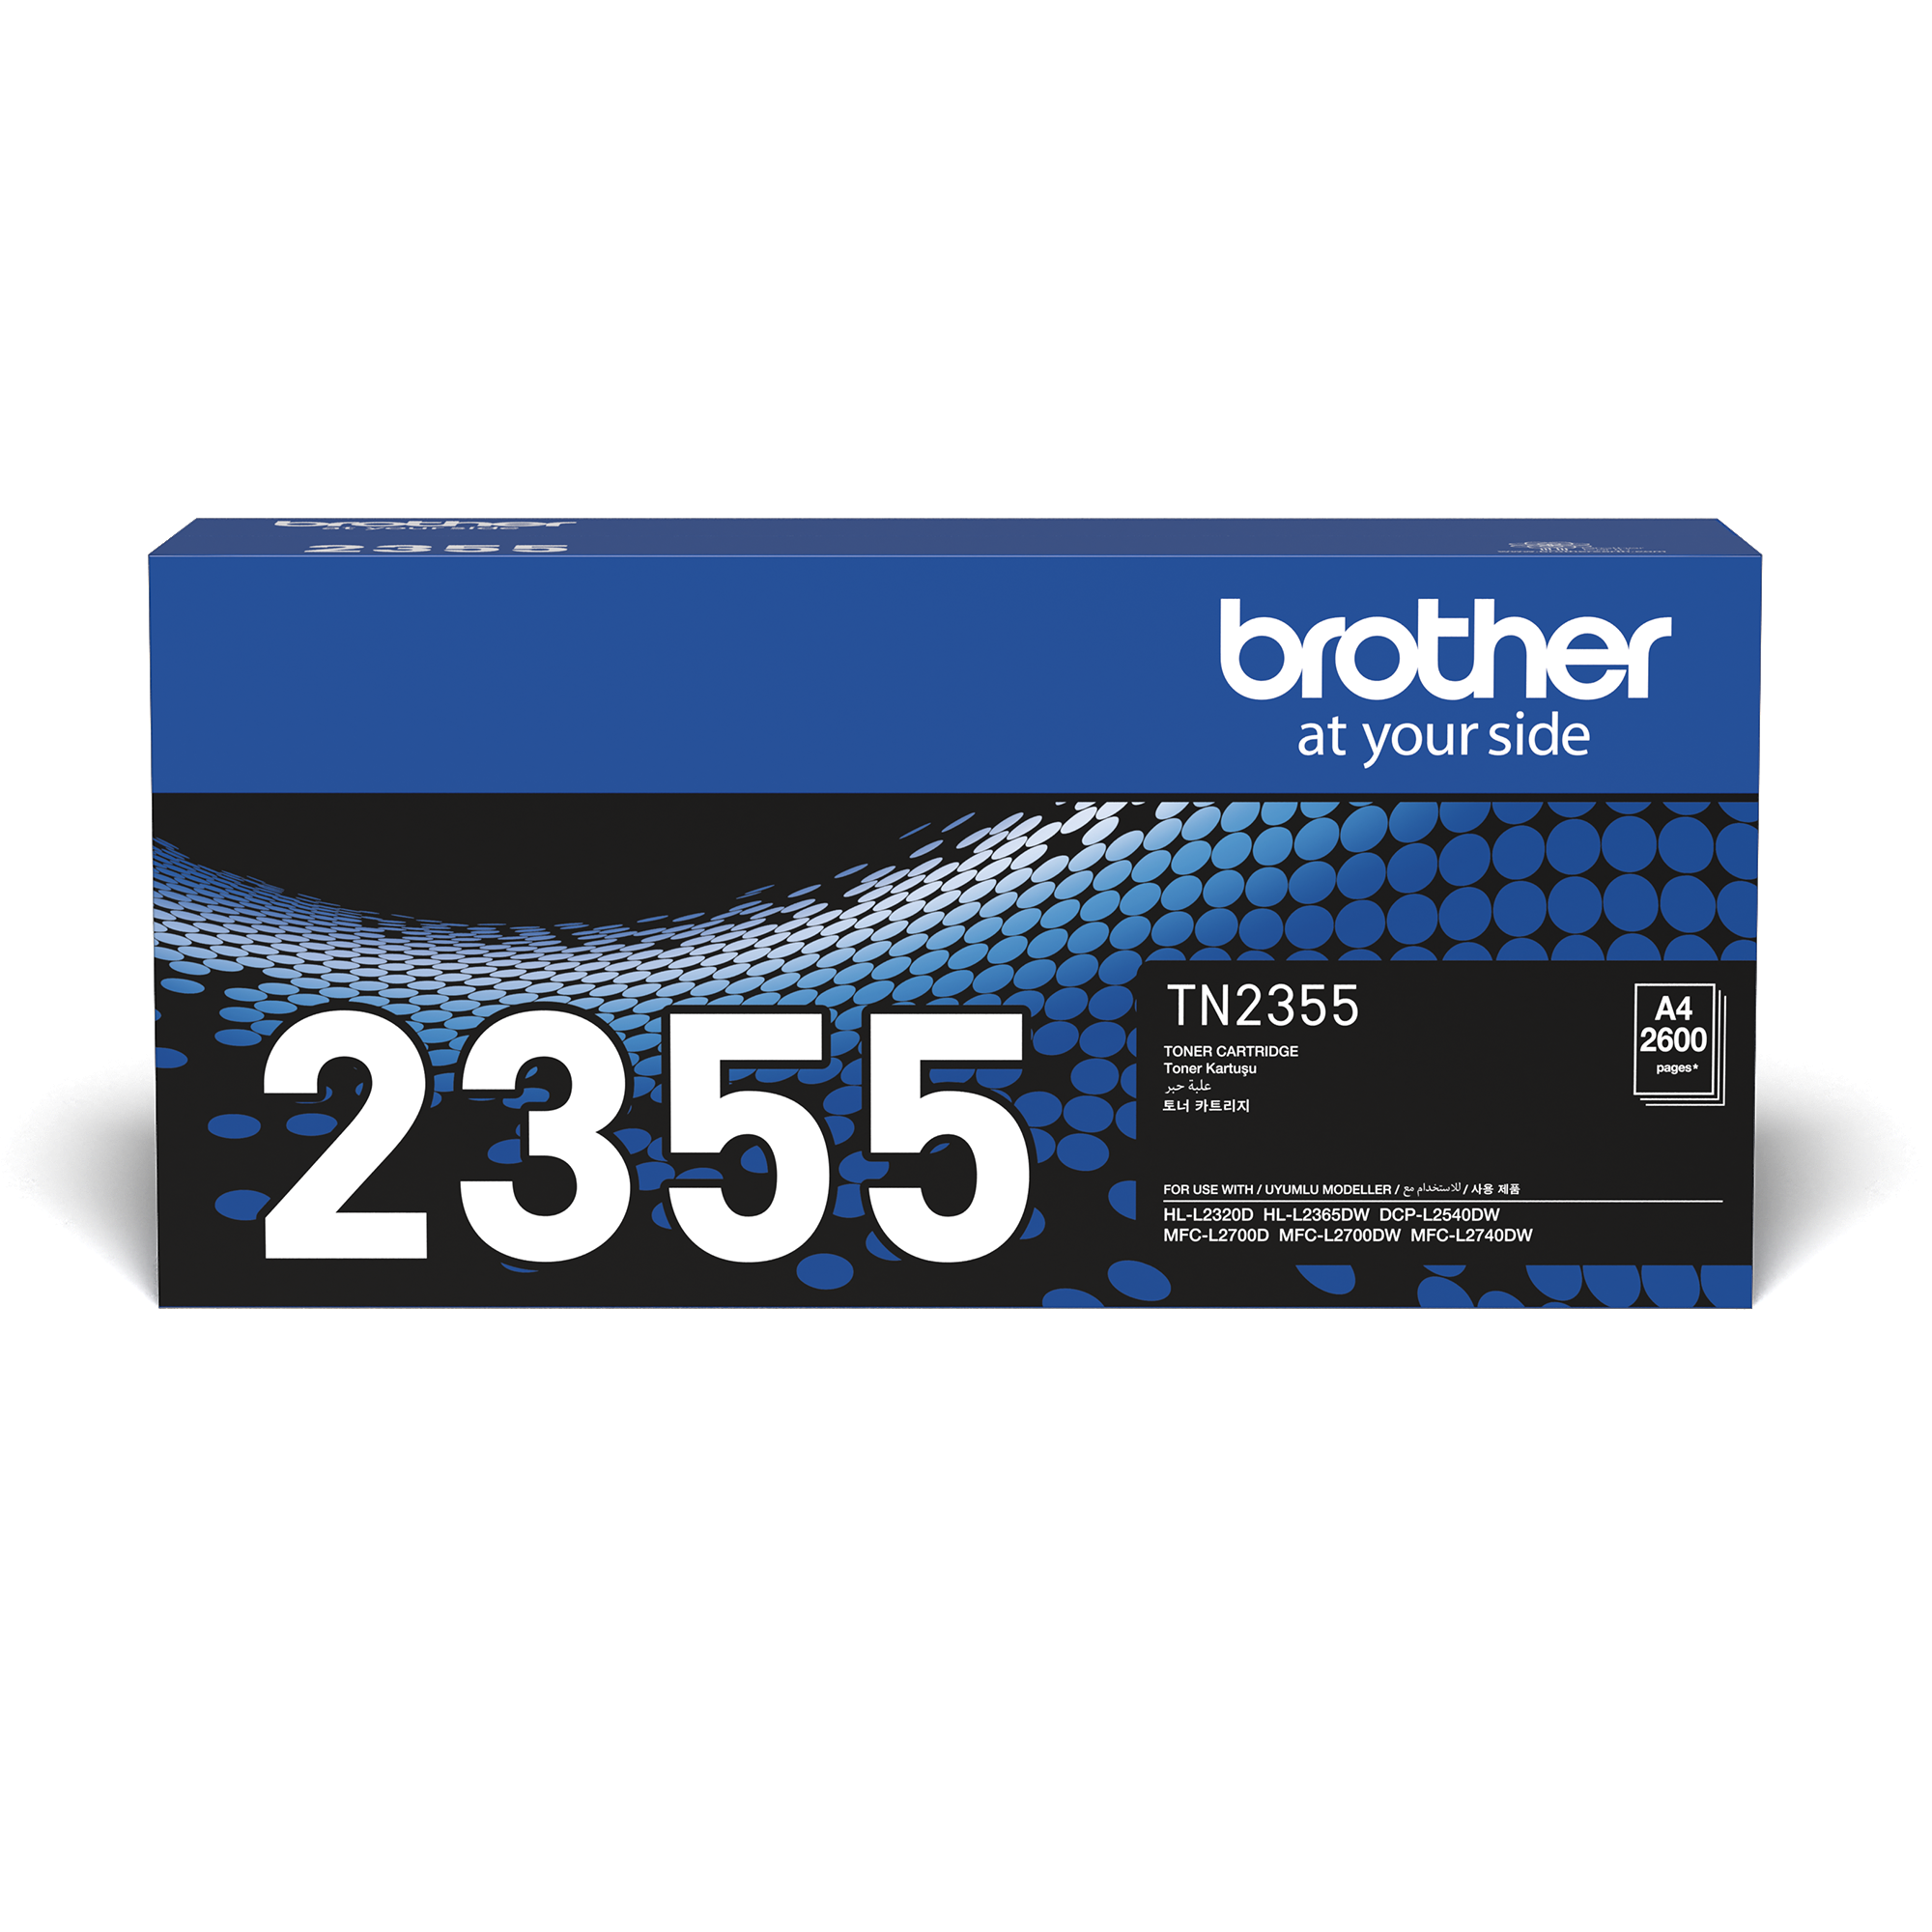 Brother TN2355 TN-2355 Toner Cartridge (2600 PAGES)